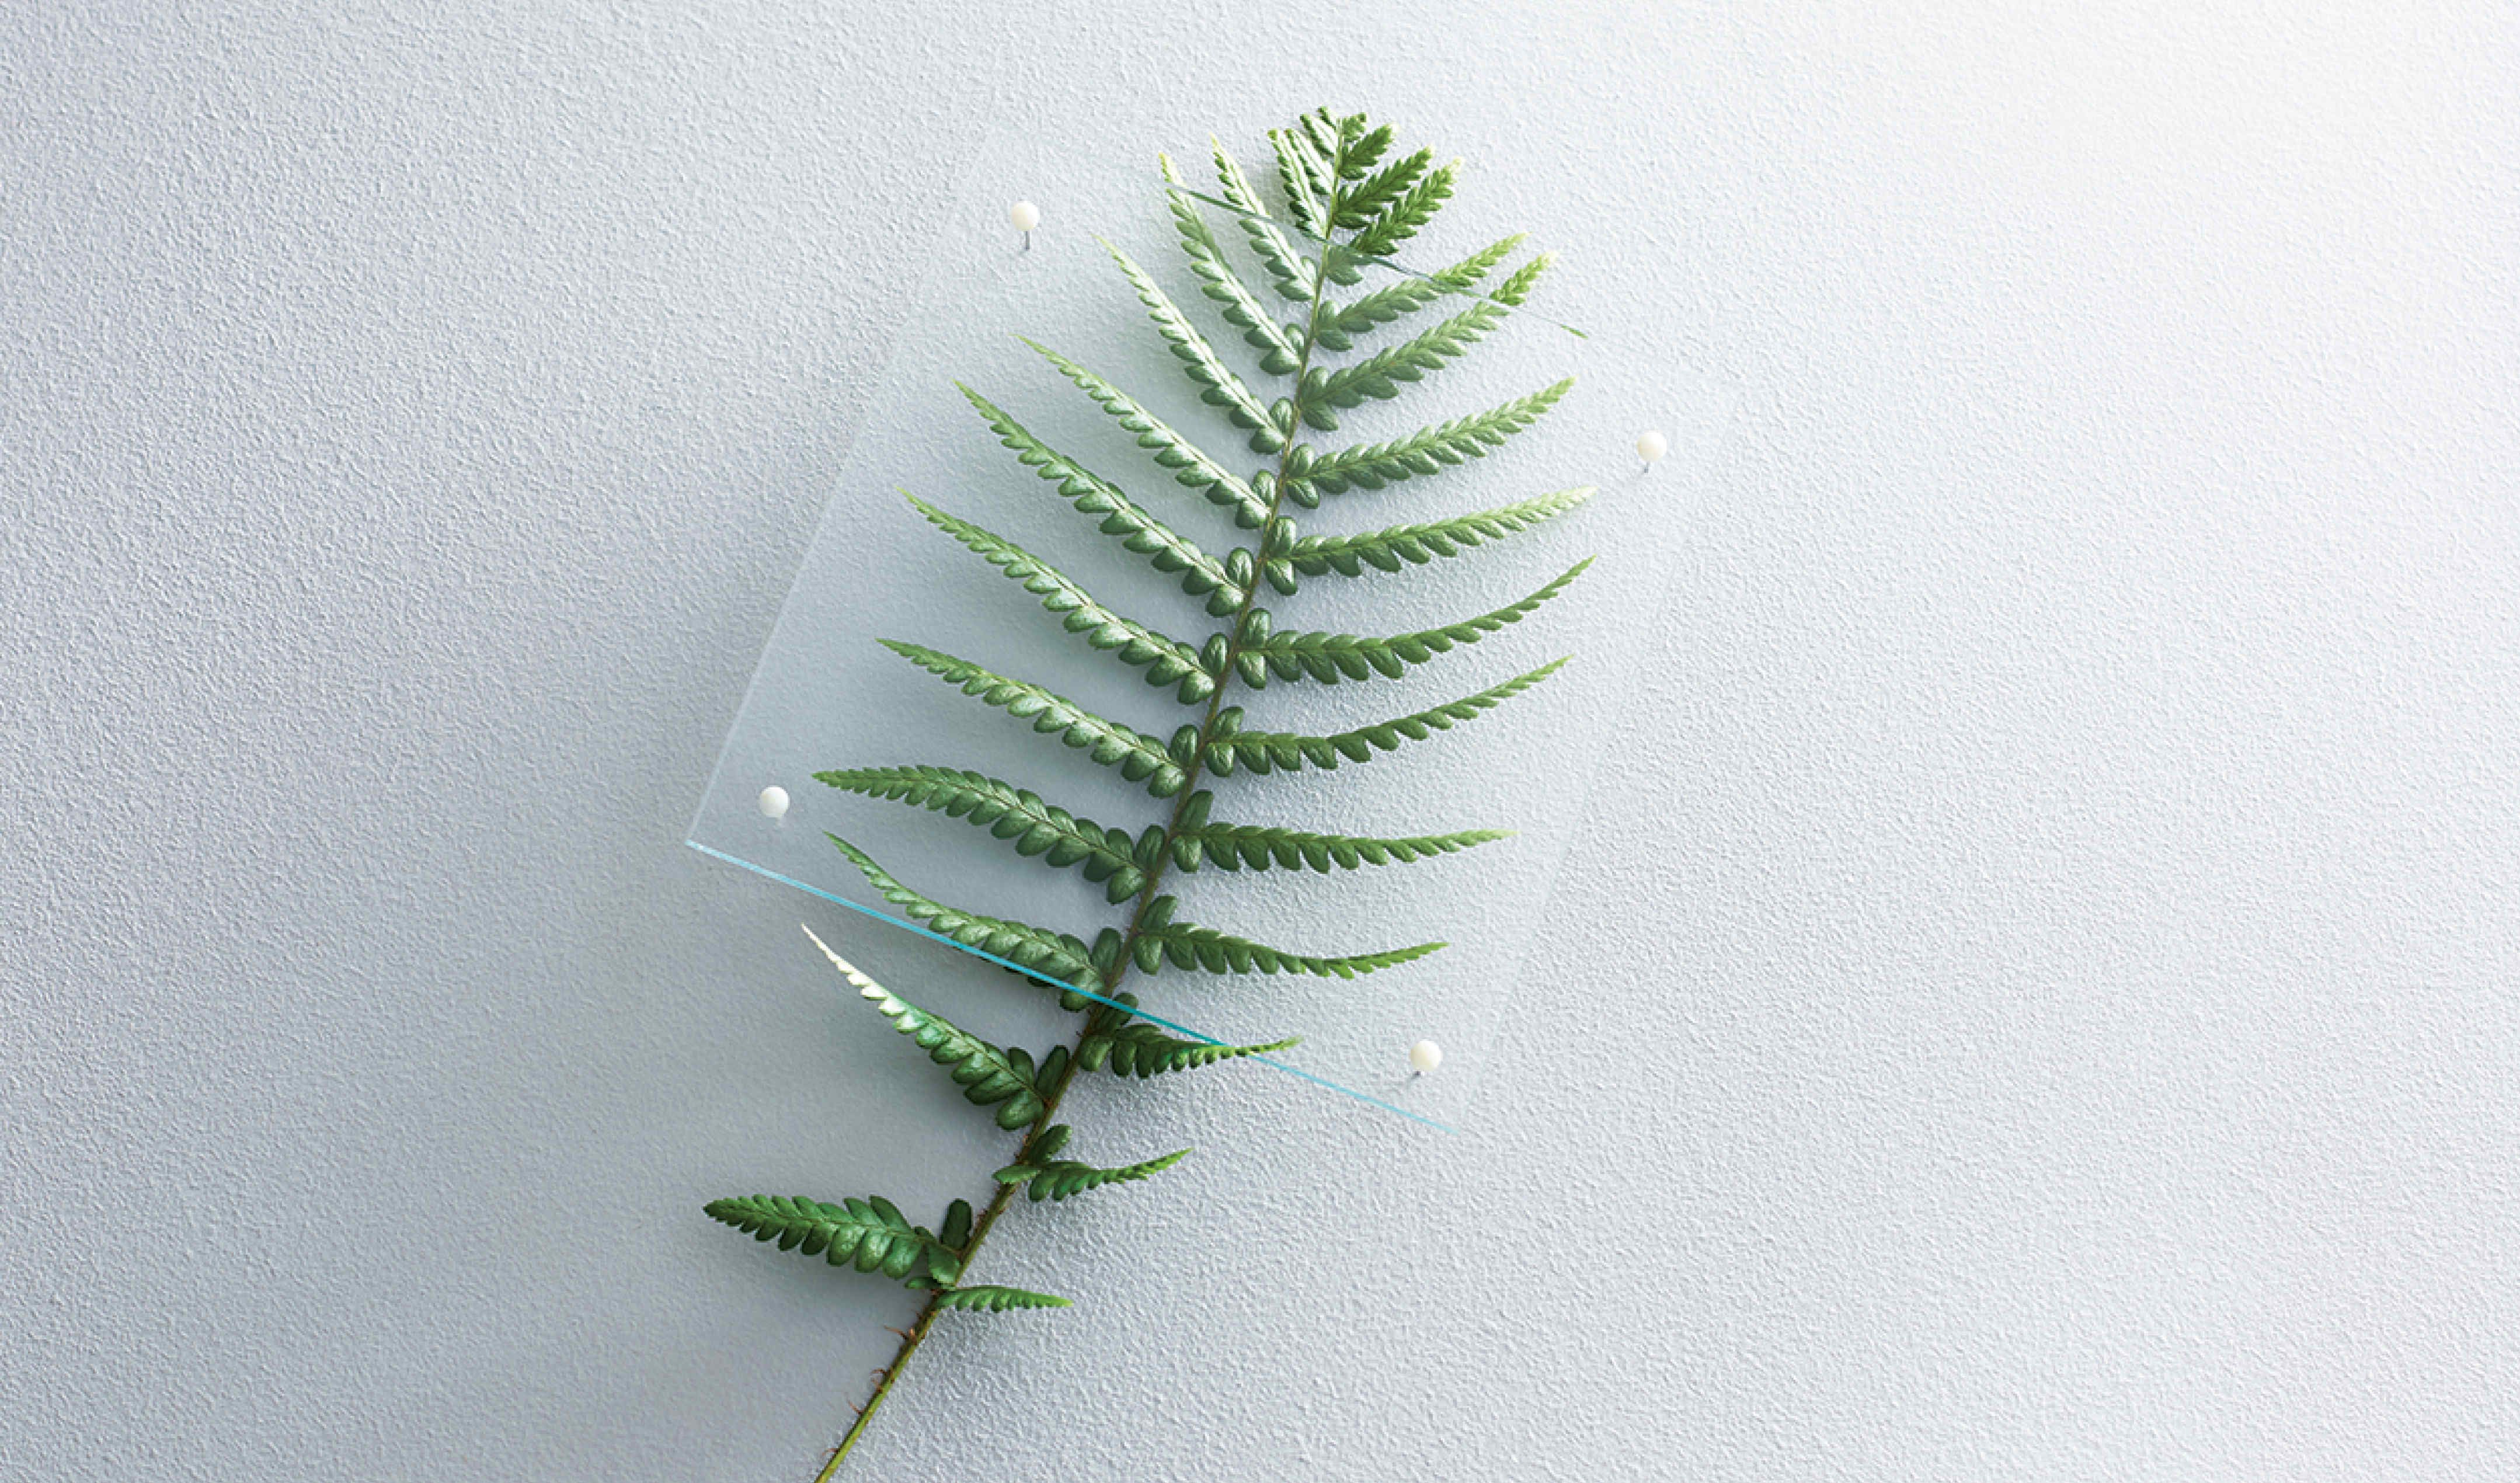 A frond from a fern under a piece of glass